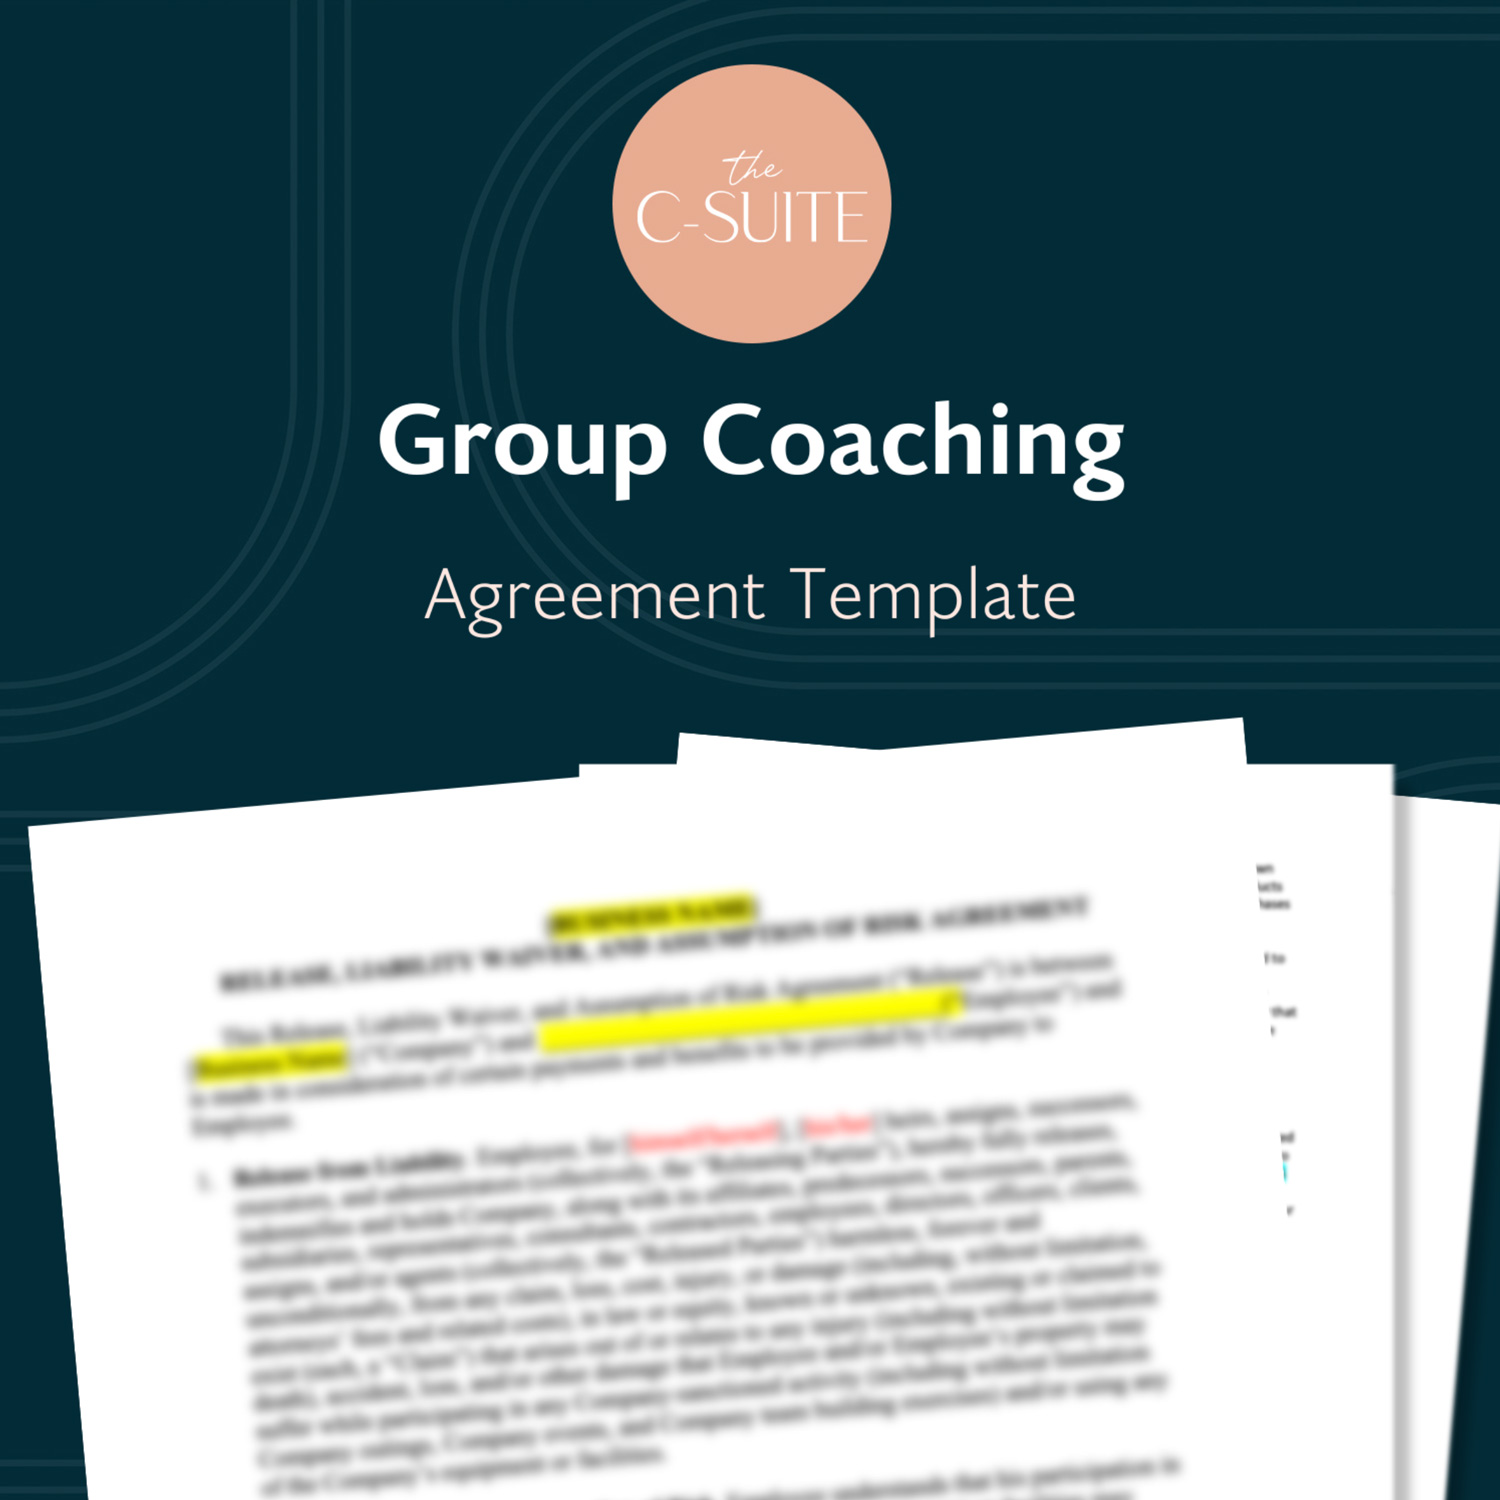 Group Coaching Agreement Template